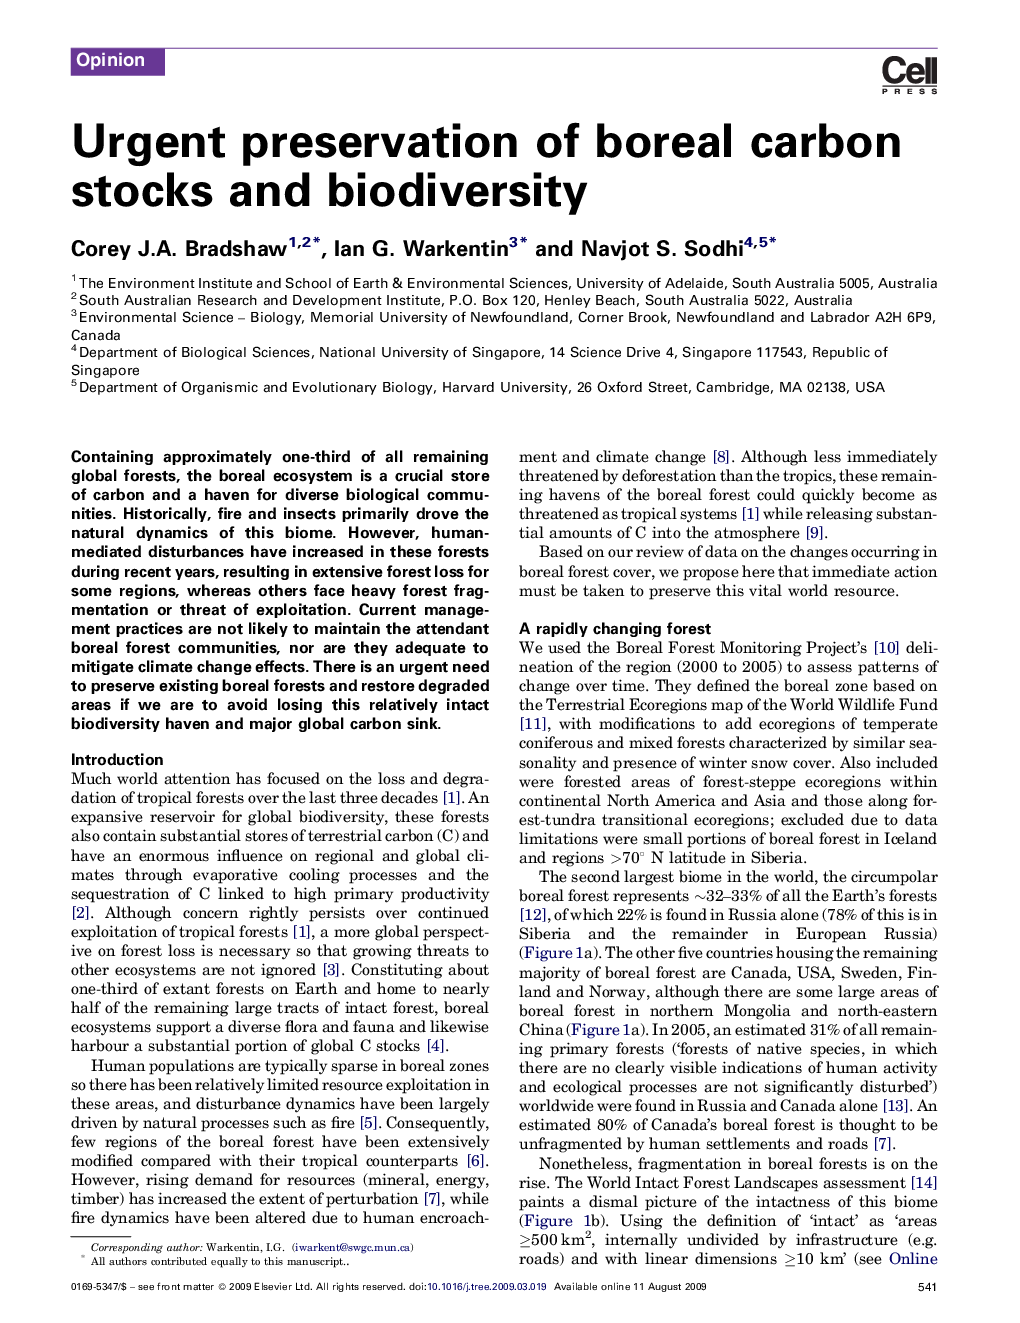 Urgent preservation of boreal carbon stocks and biodiversity